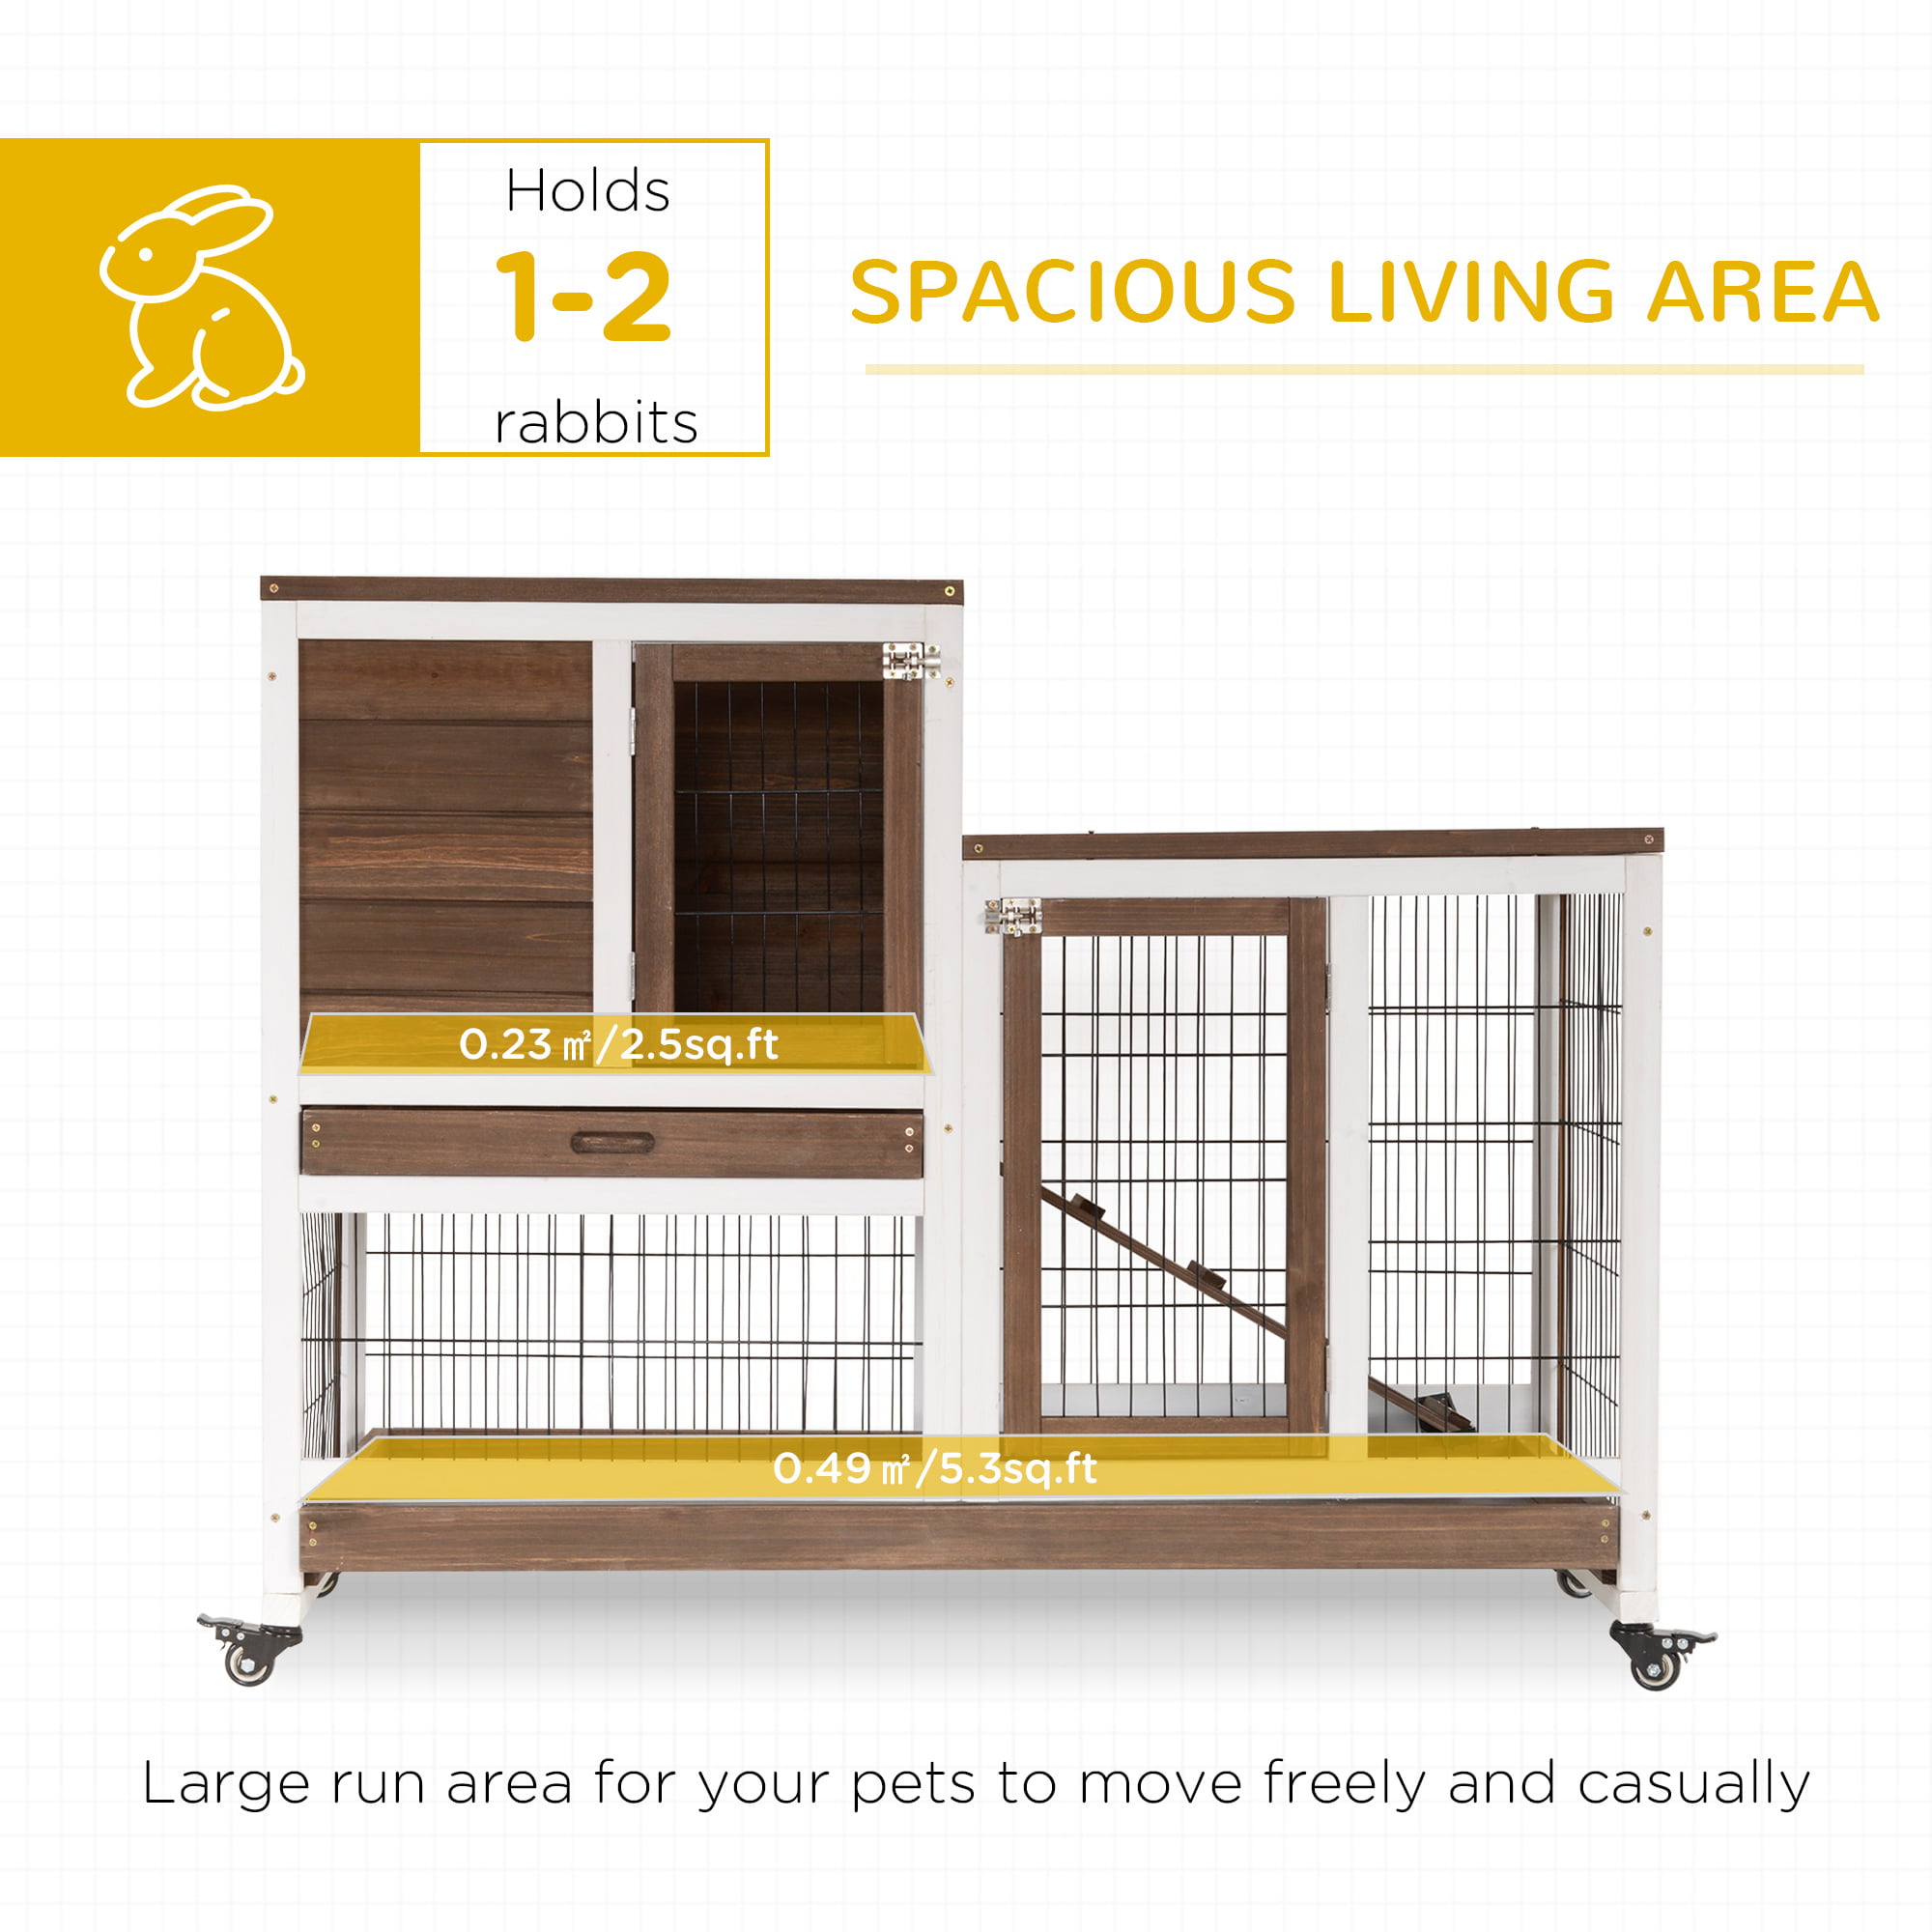 Pawhut Wooden Rabbit Hutch Elevated Bunny Cage Indoor Small Animal Habitat  With Enclosed Run With Wheels, Ramp, Removable Tray For Guinea Pigs, Brown  : Target